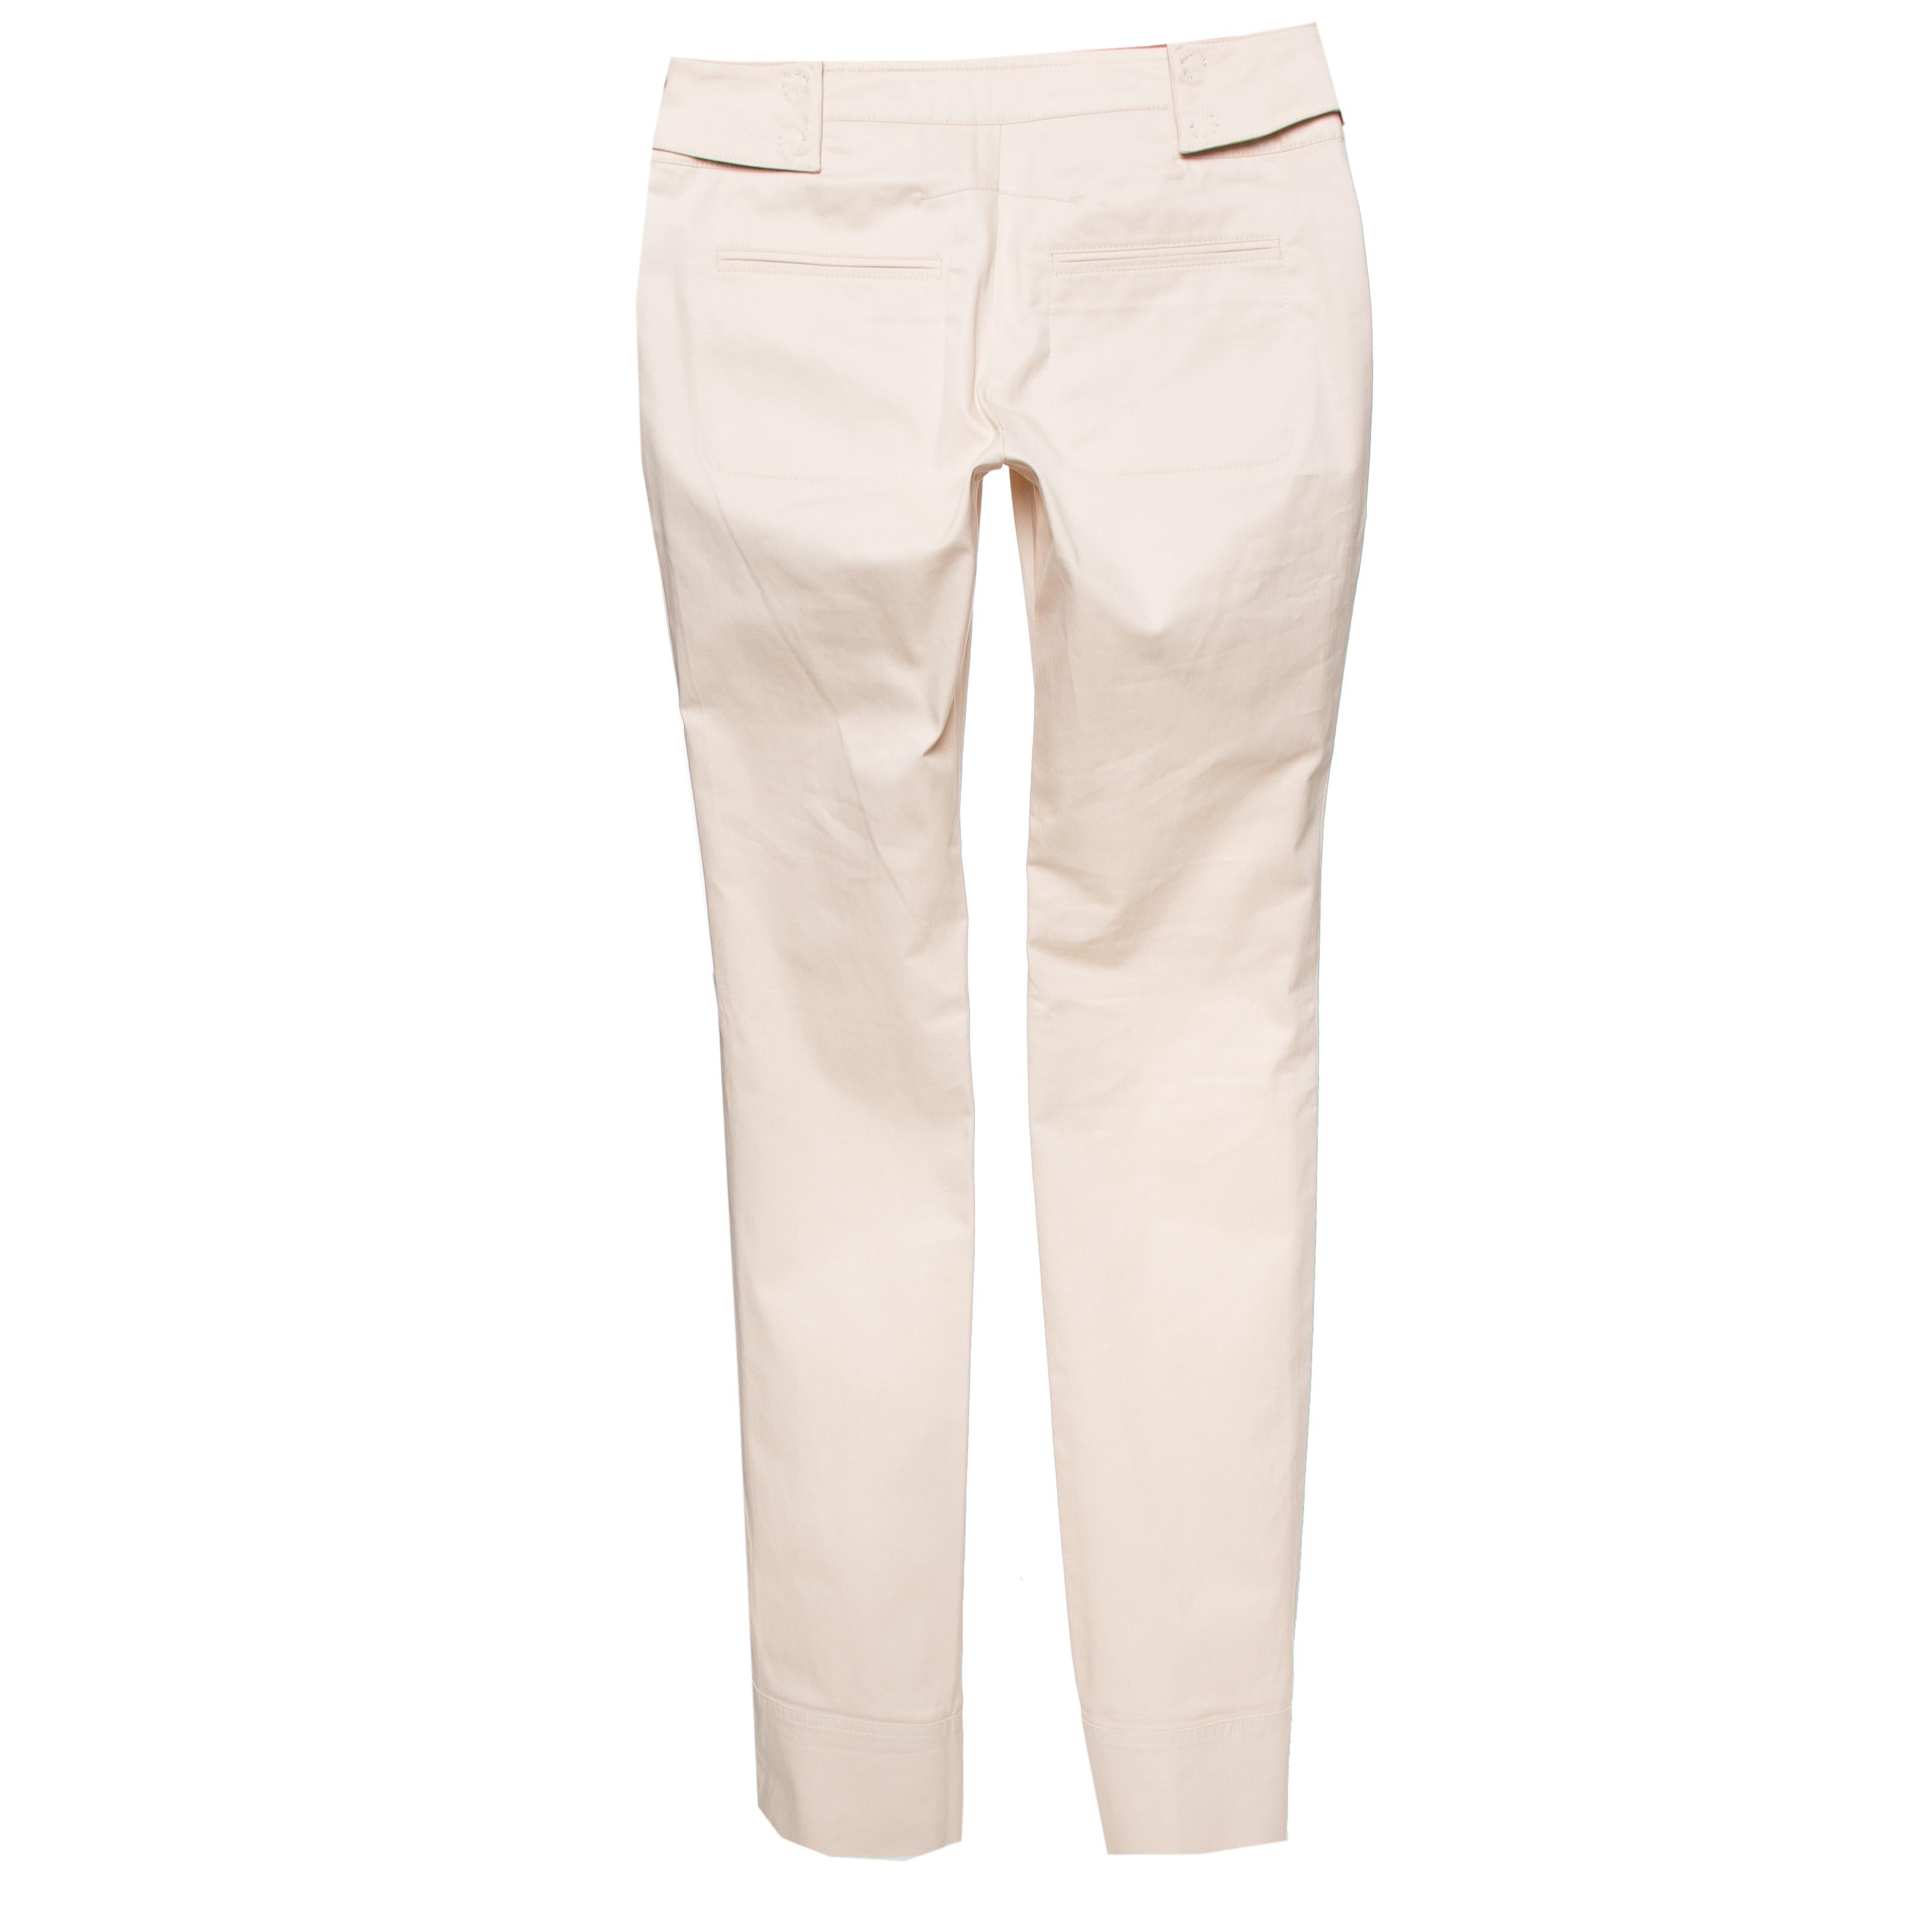 Made from cotton, these beige Dior Boutique pants offer a great fit. They are equipped with belt loops, zip closure, and four pockets. Style them with simple tops and high heels.

